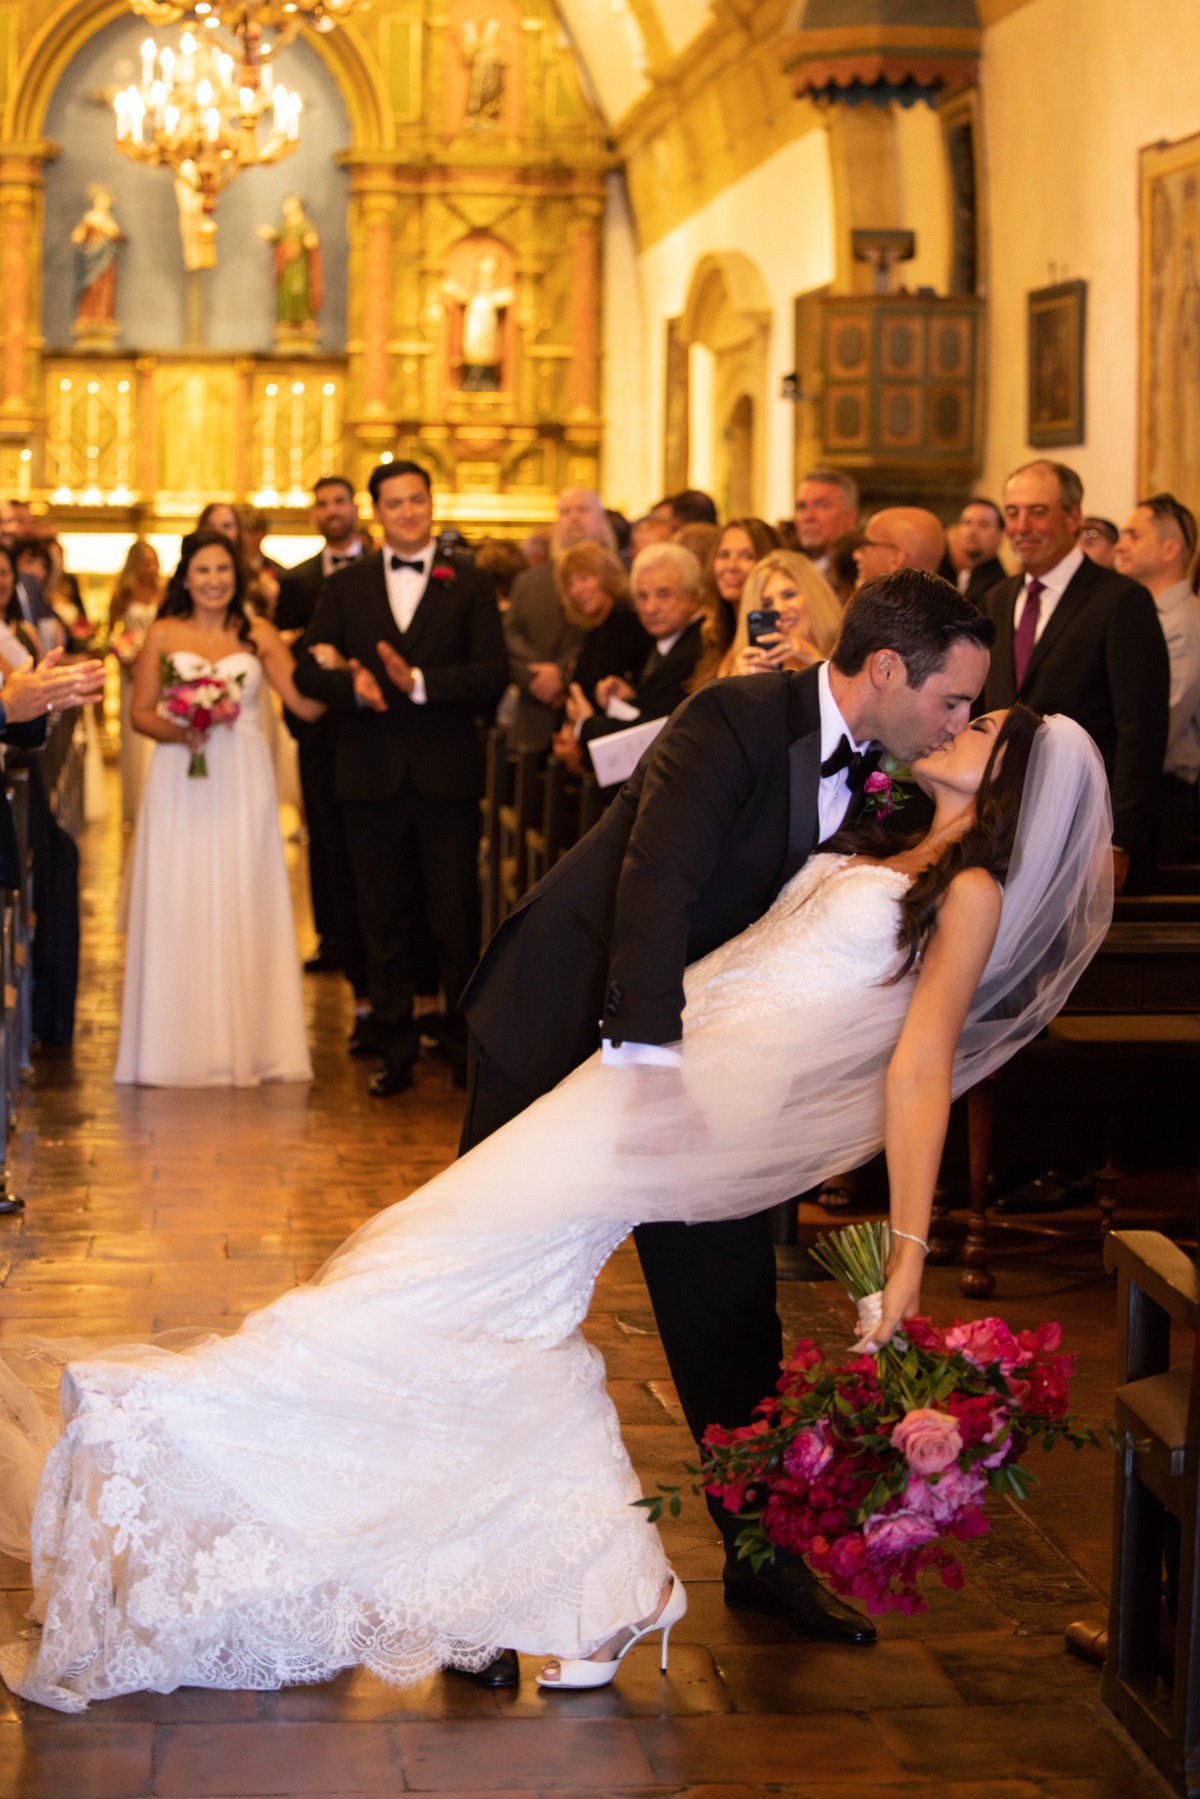 First kiss at cathedral wedding